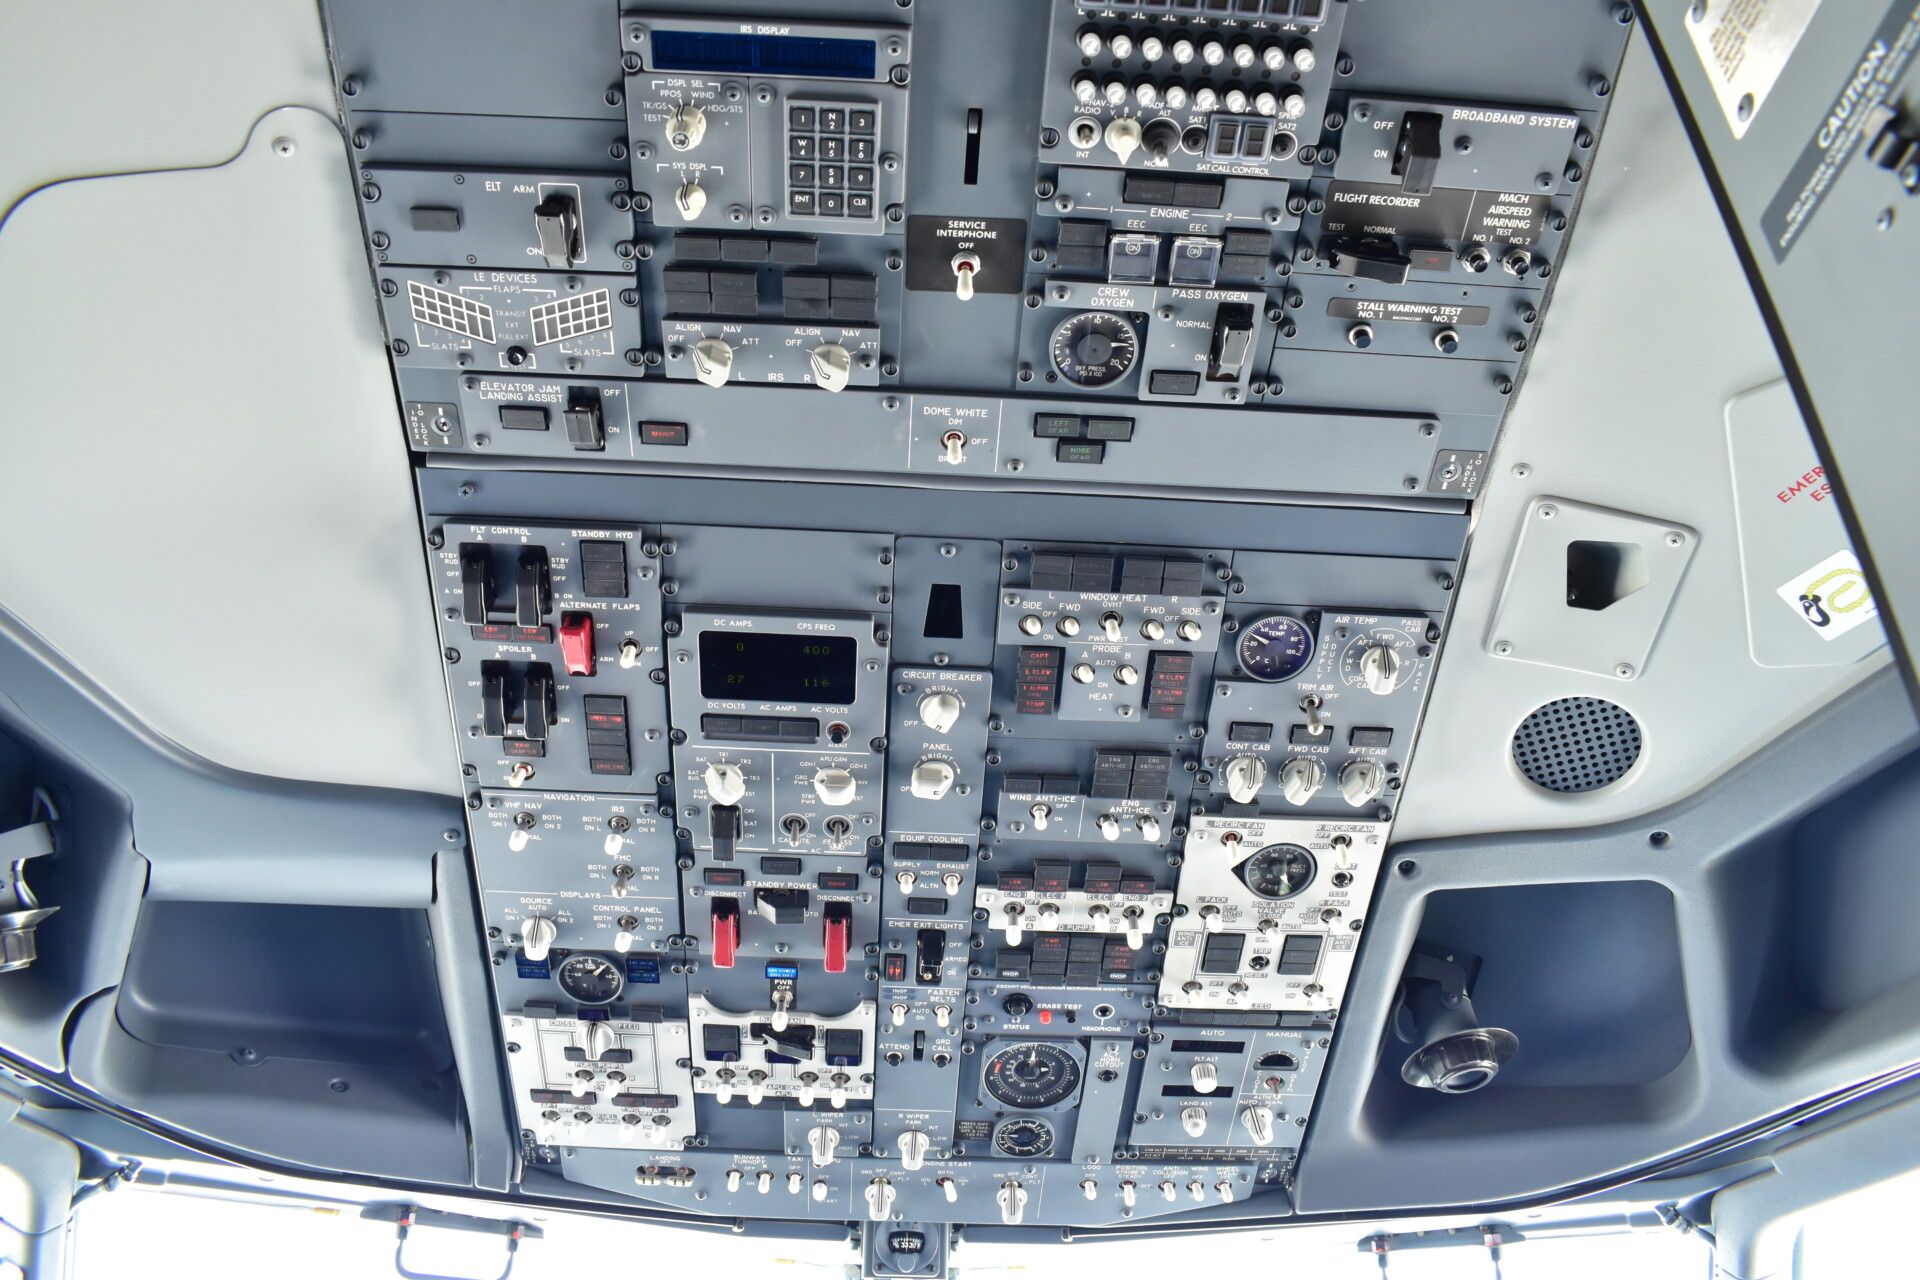 Many buttons and switches on the top of an airliner cockpit.